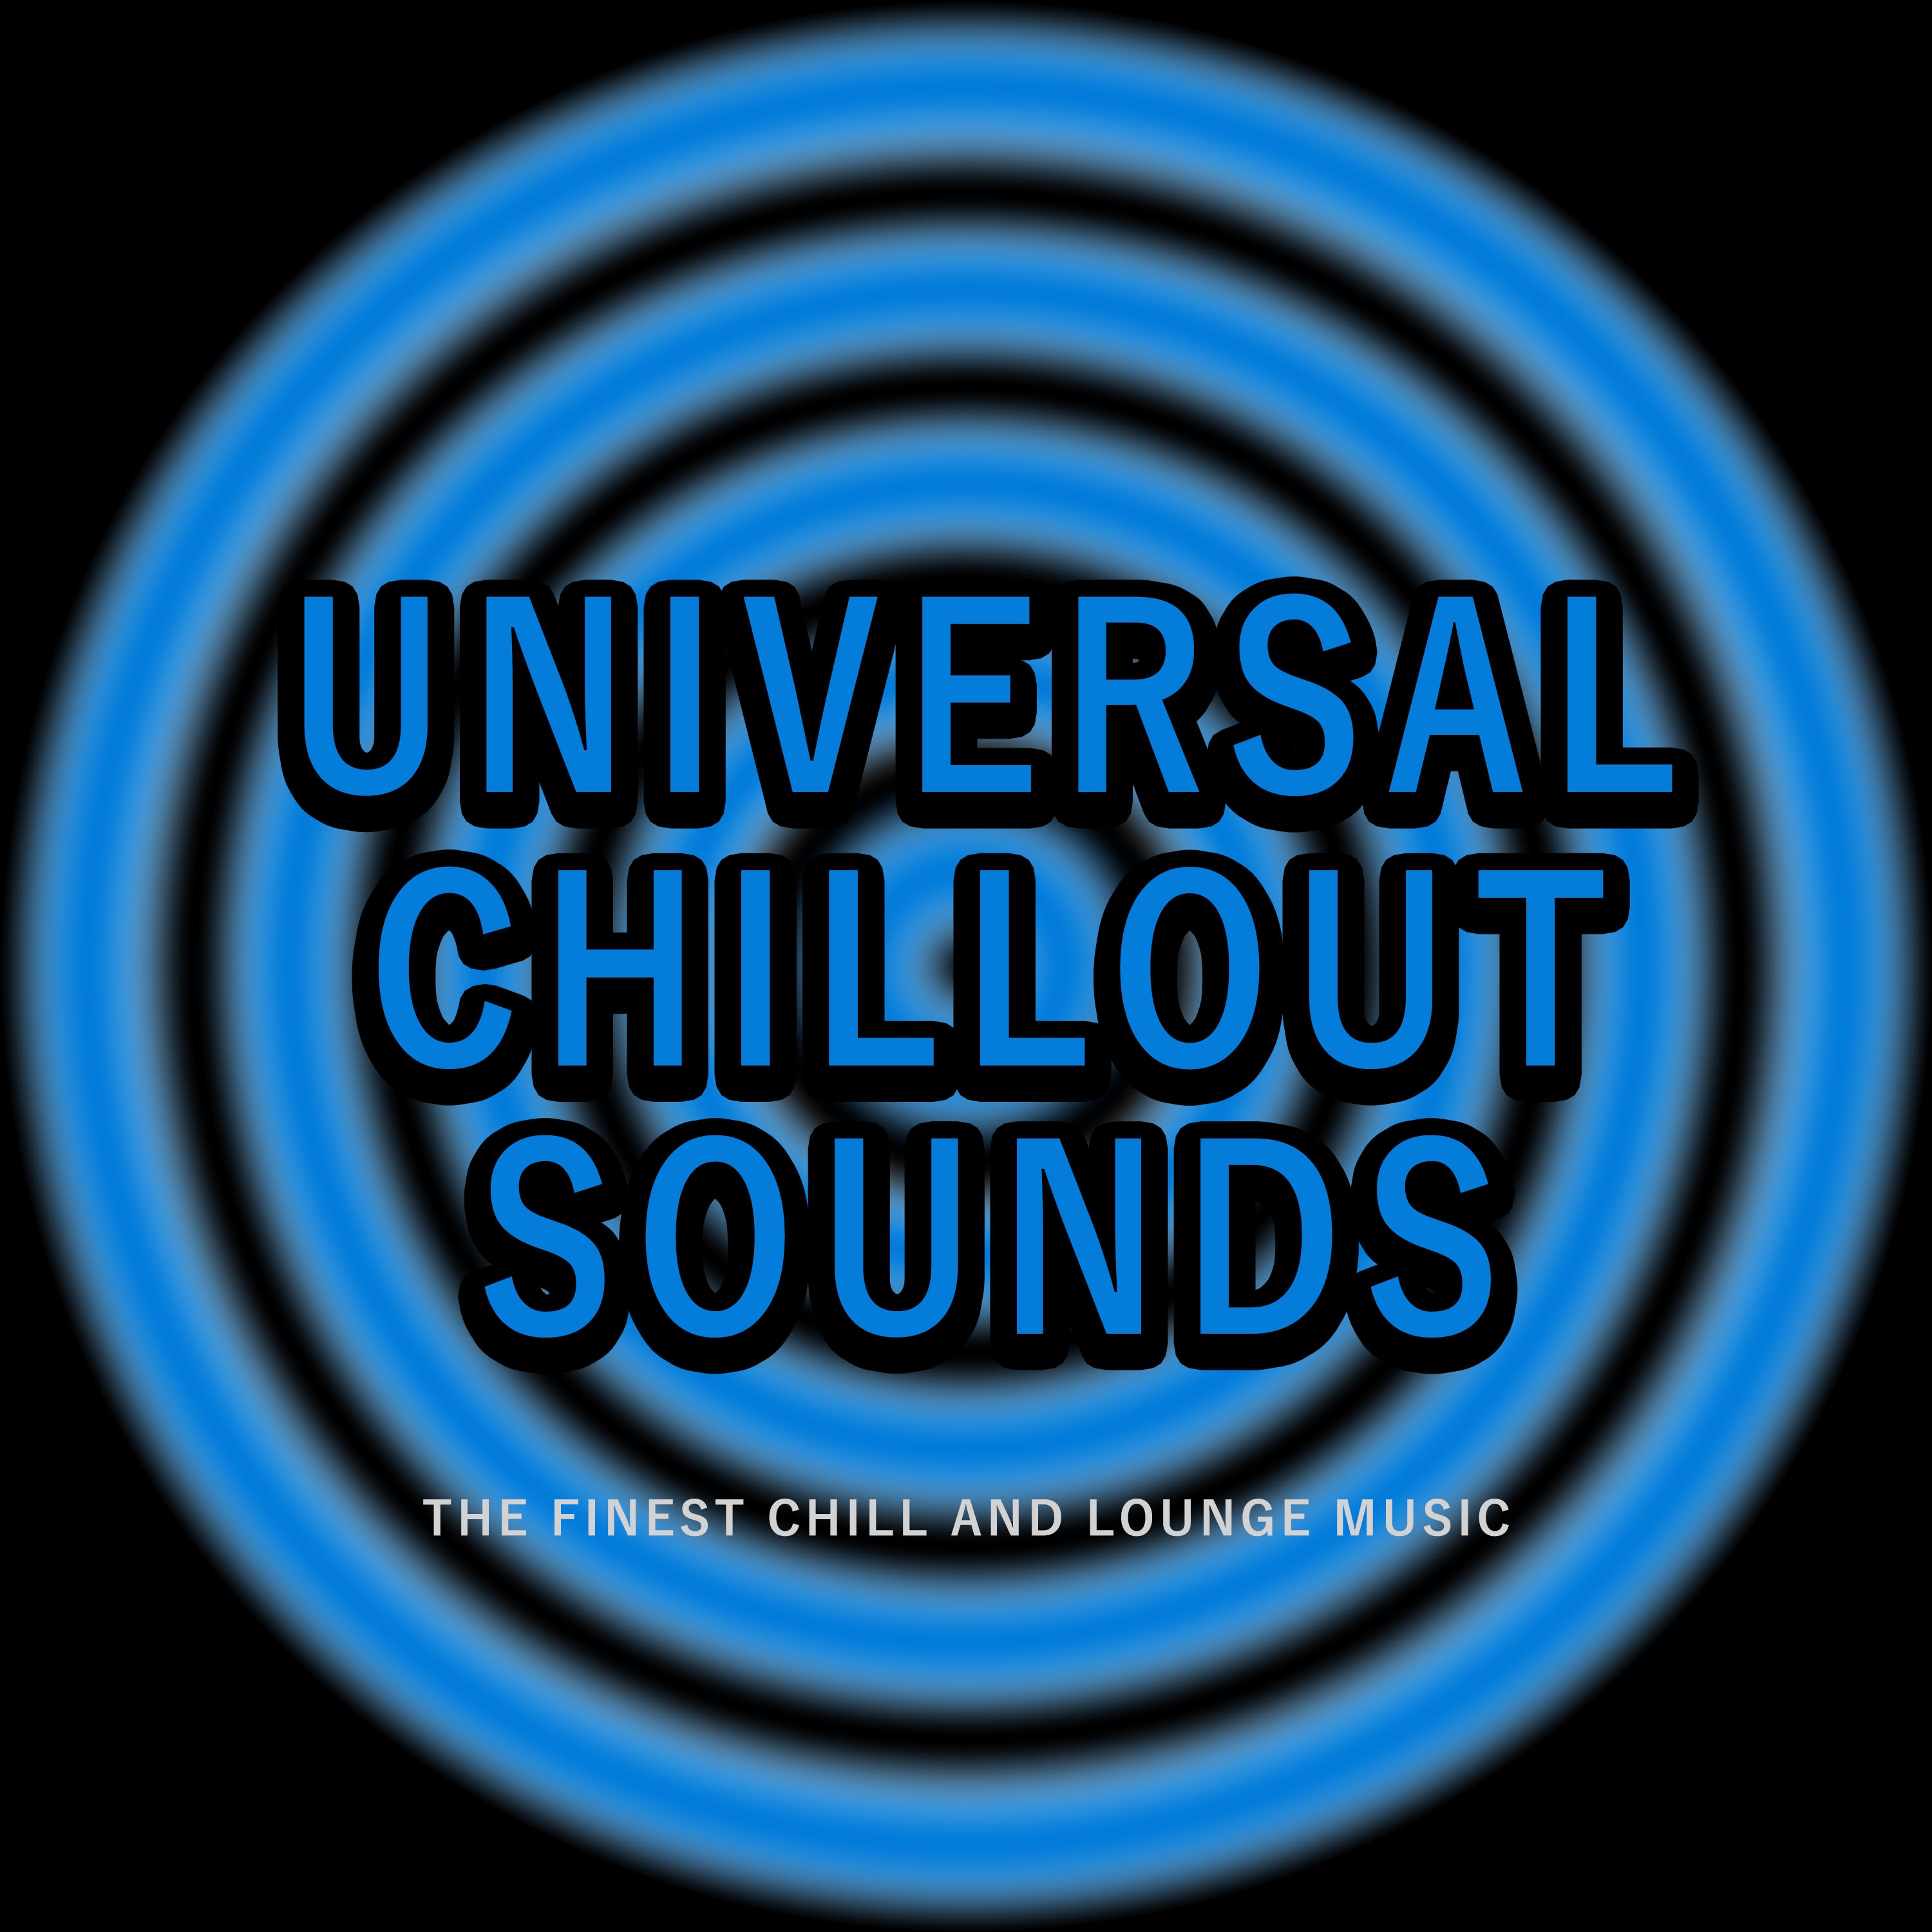 Universal Chillout Sounds (The Finest Chill and Lounge Music)